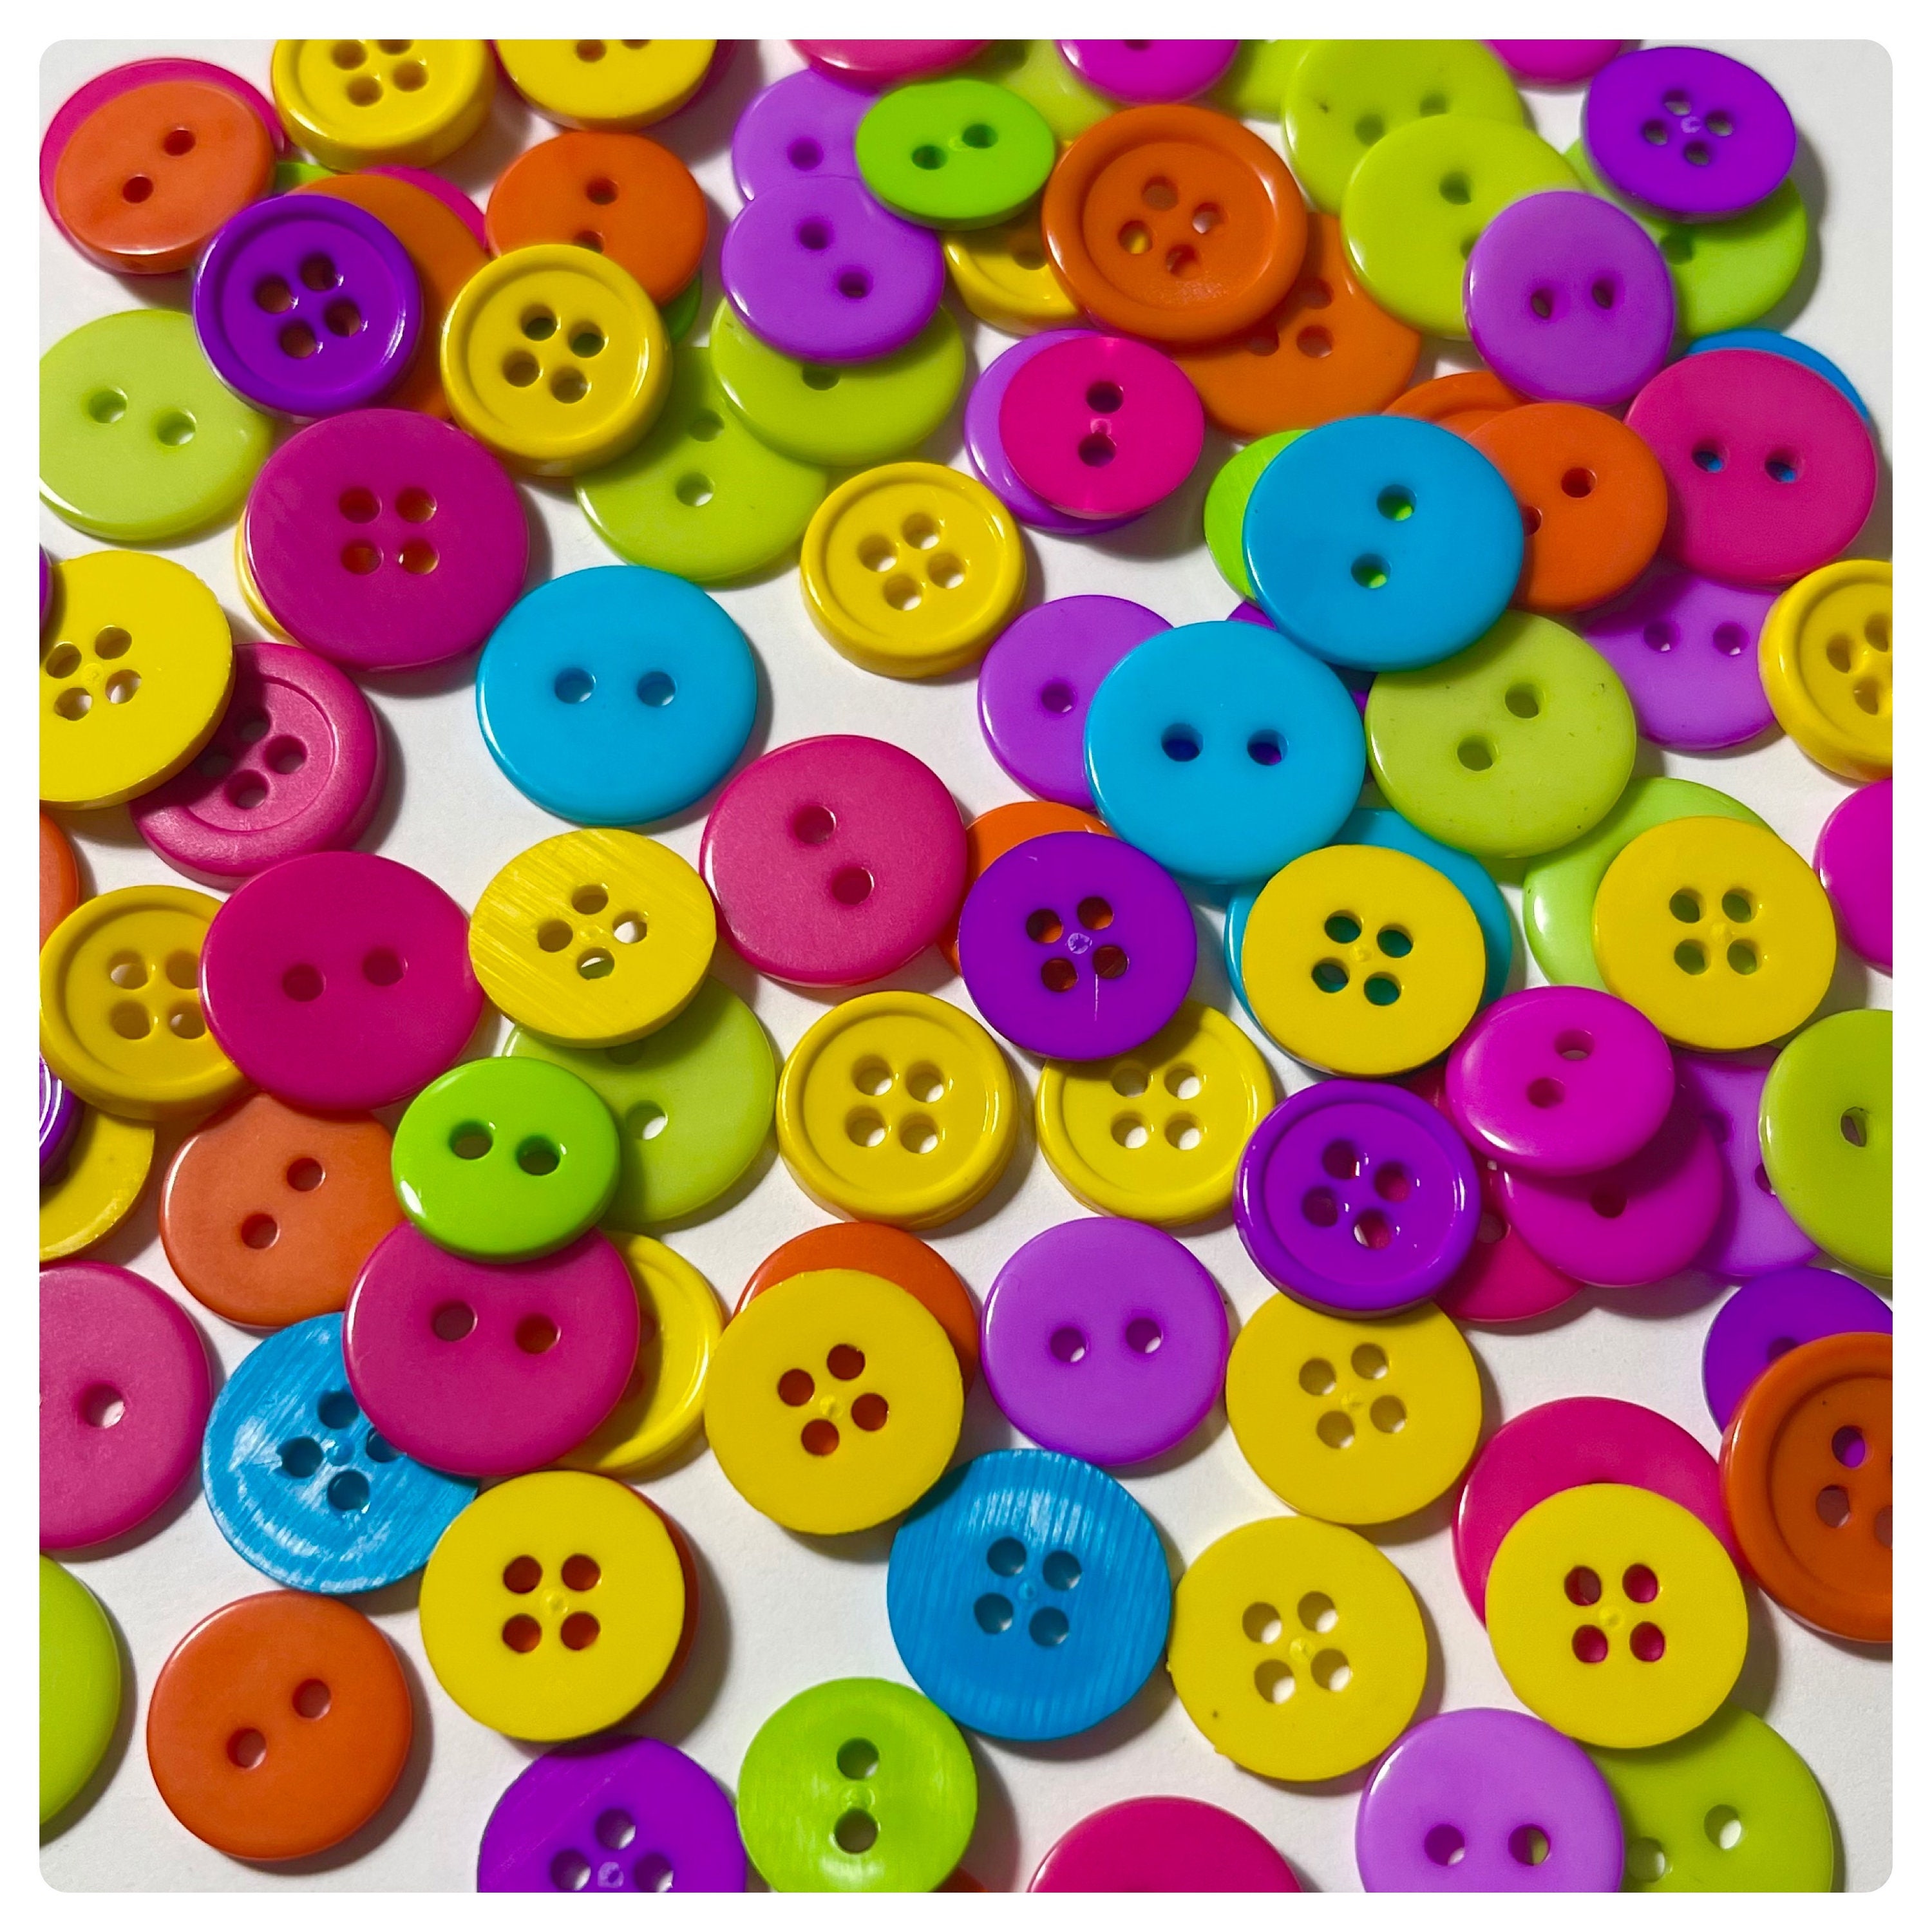 DISCONTINUED 100 or 200 Rainbow Round Buttons, Round Assorted Mix Sewing  Crafts Plastic Assorted Buttons Standard Rainbow Mash Round Mixed 